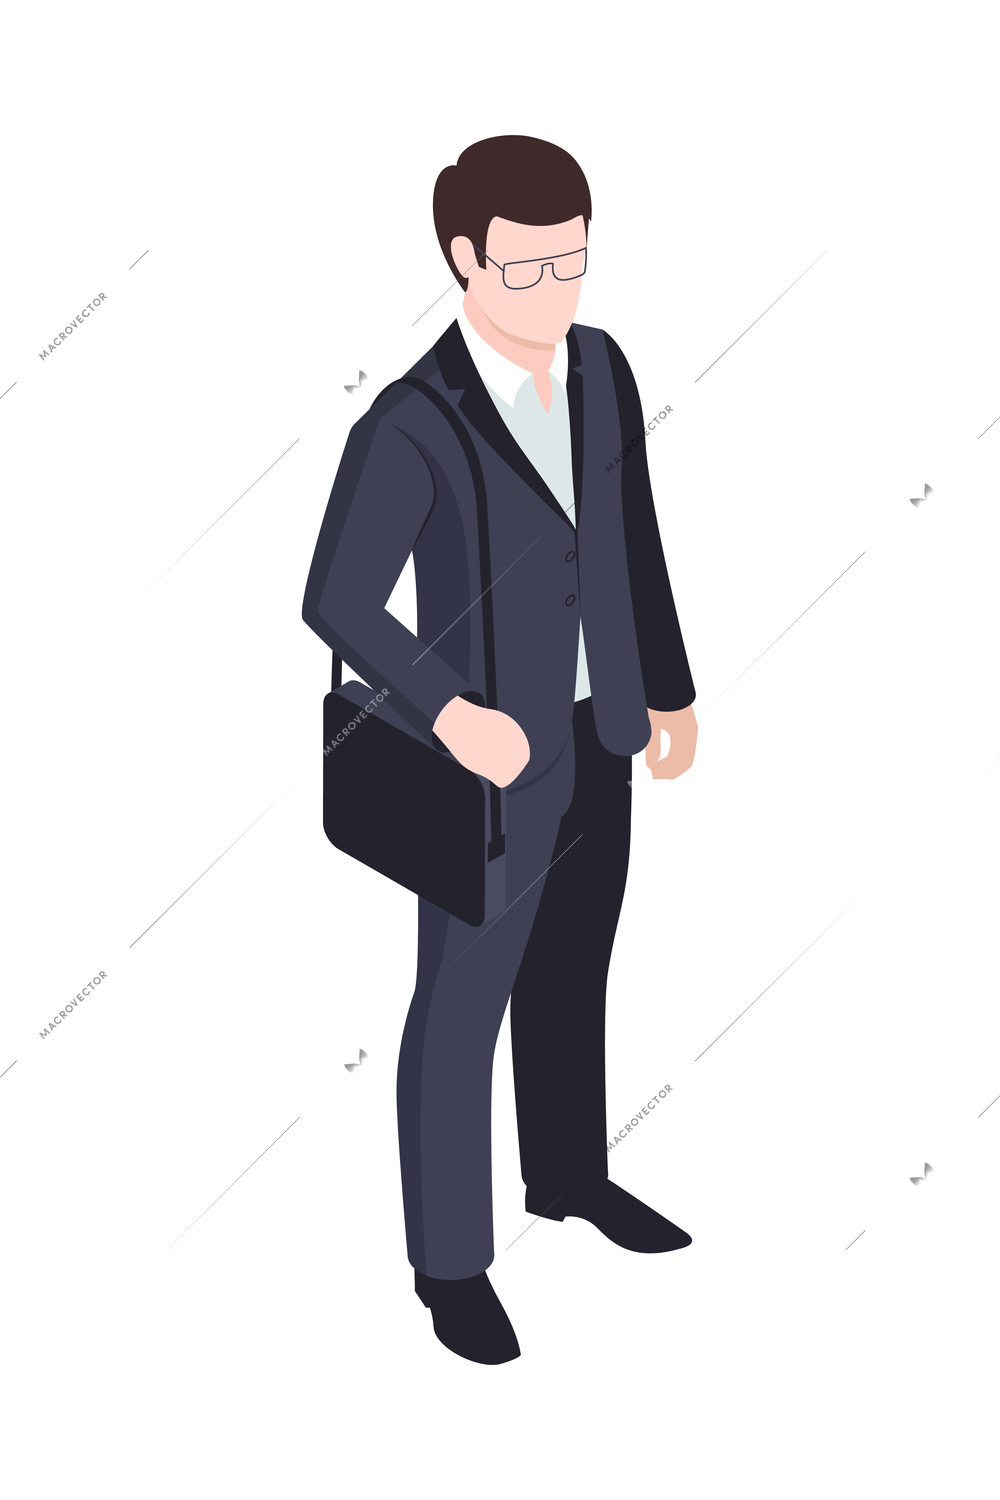 Isometric icon with businessman in office wear glasses with briefcase 3d vector illustration